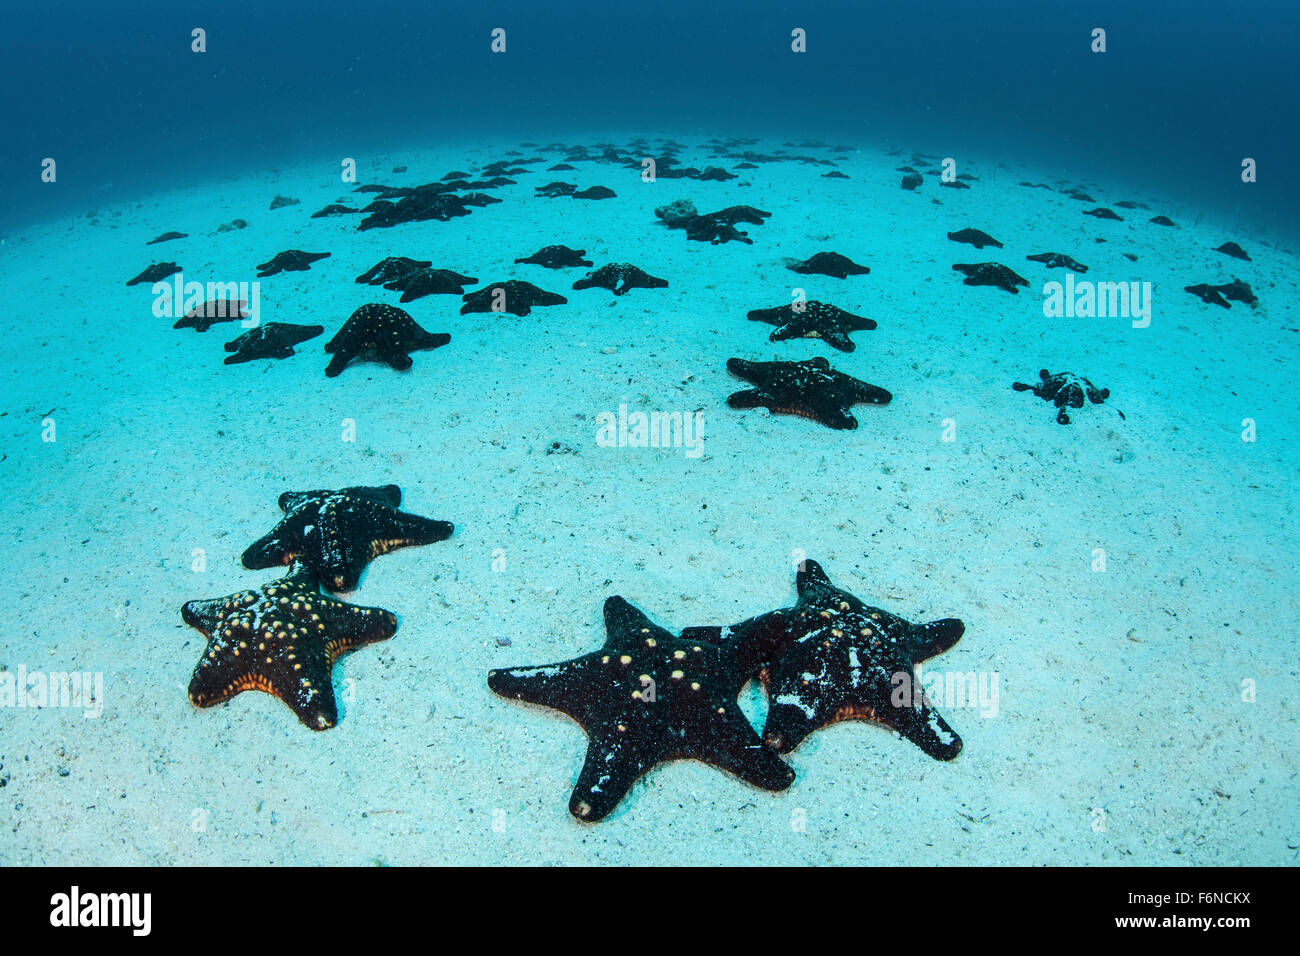 Starfish cover the sandy seafloor near Cocos Island, Costa Rica. This remote, Pacific island is famous for its healthy fish and Stock Photo